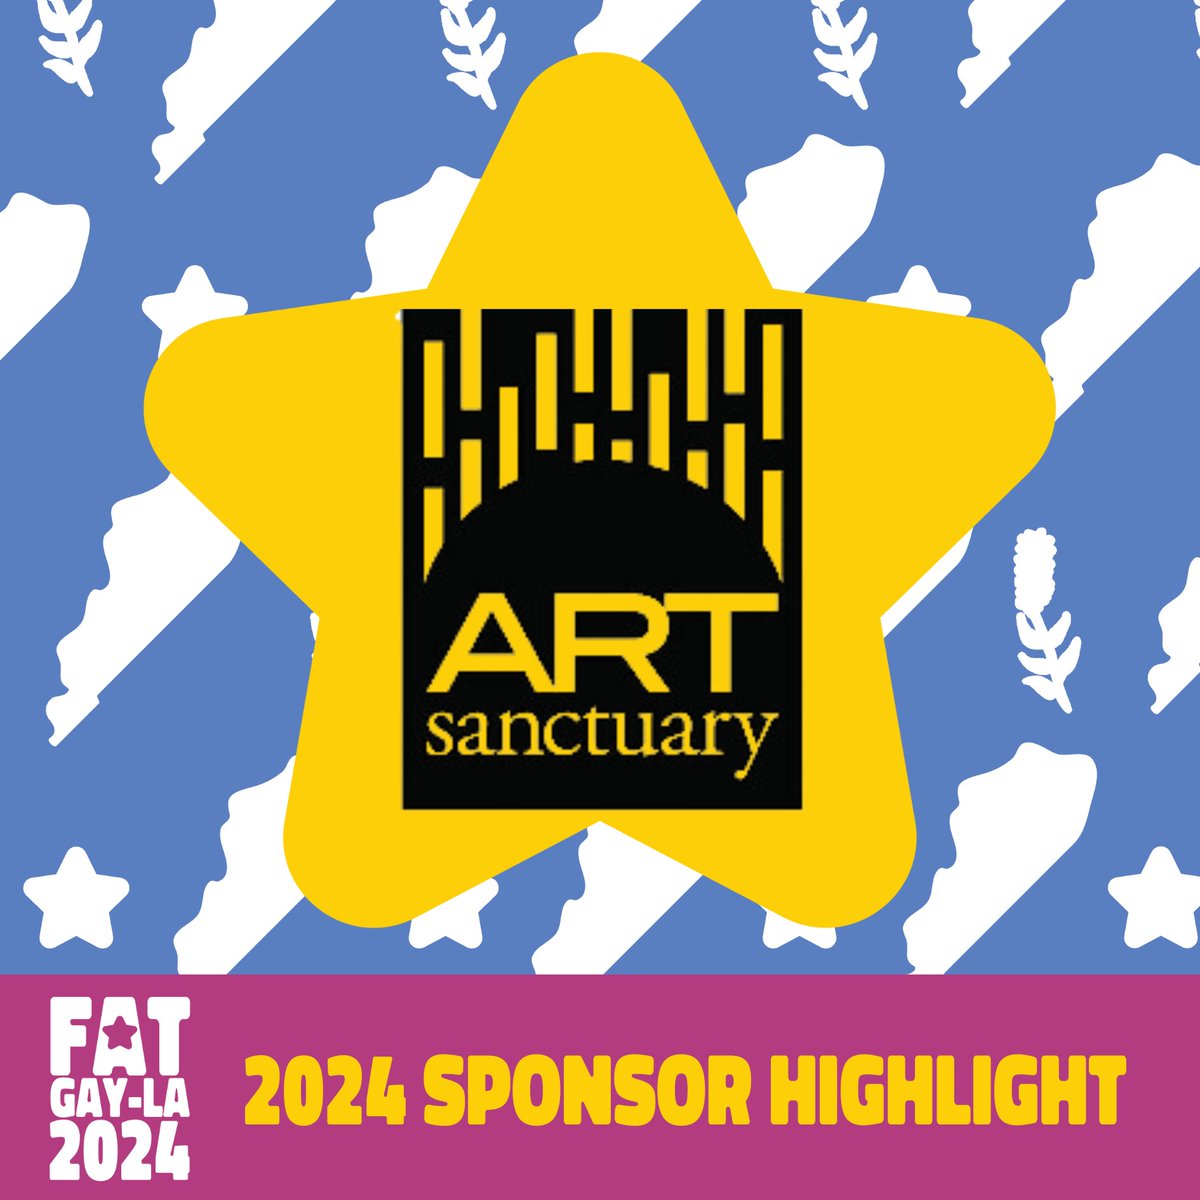 HUGE shoutout to Art Sanctuary for being the proud sponsor of #KHJNFATGayLA for the second year in a row! 🌟 Join us for a fabulous evening and support Kentuckians in need of access to abortions and gender-affirming care. Get your tickets now at bit.ly/FATGayLa24